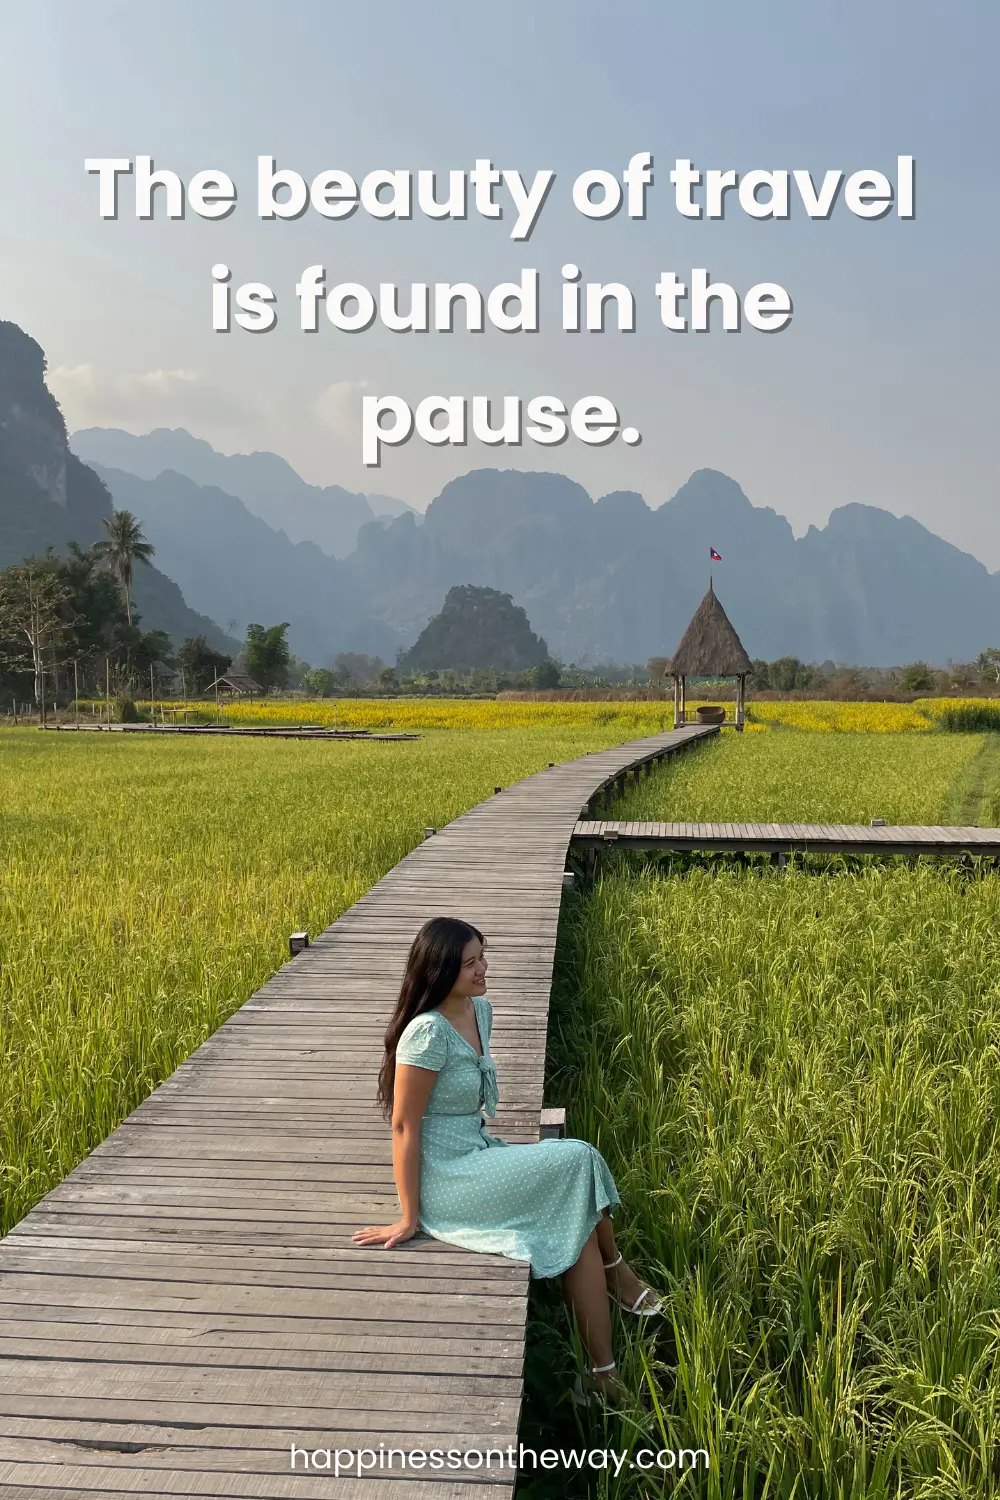 A serene scene capturing slow travel, featuring me in a pastel blue dress sitting on a wooden pathway amidst lush green rice fields with mountains in the distance. The overlaying quote 'The beauty of travel is found in the pause' complements the peaceful landscape, perfect for a slow travel quote.